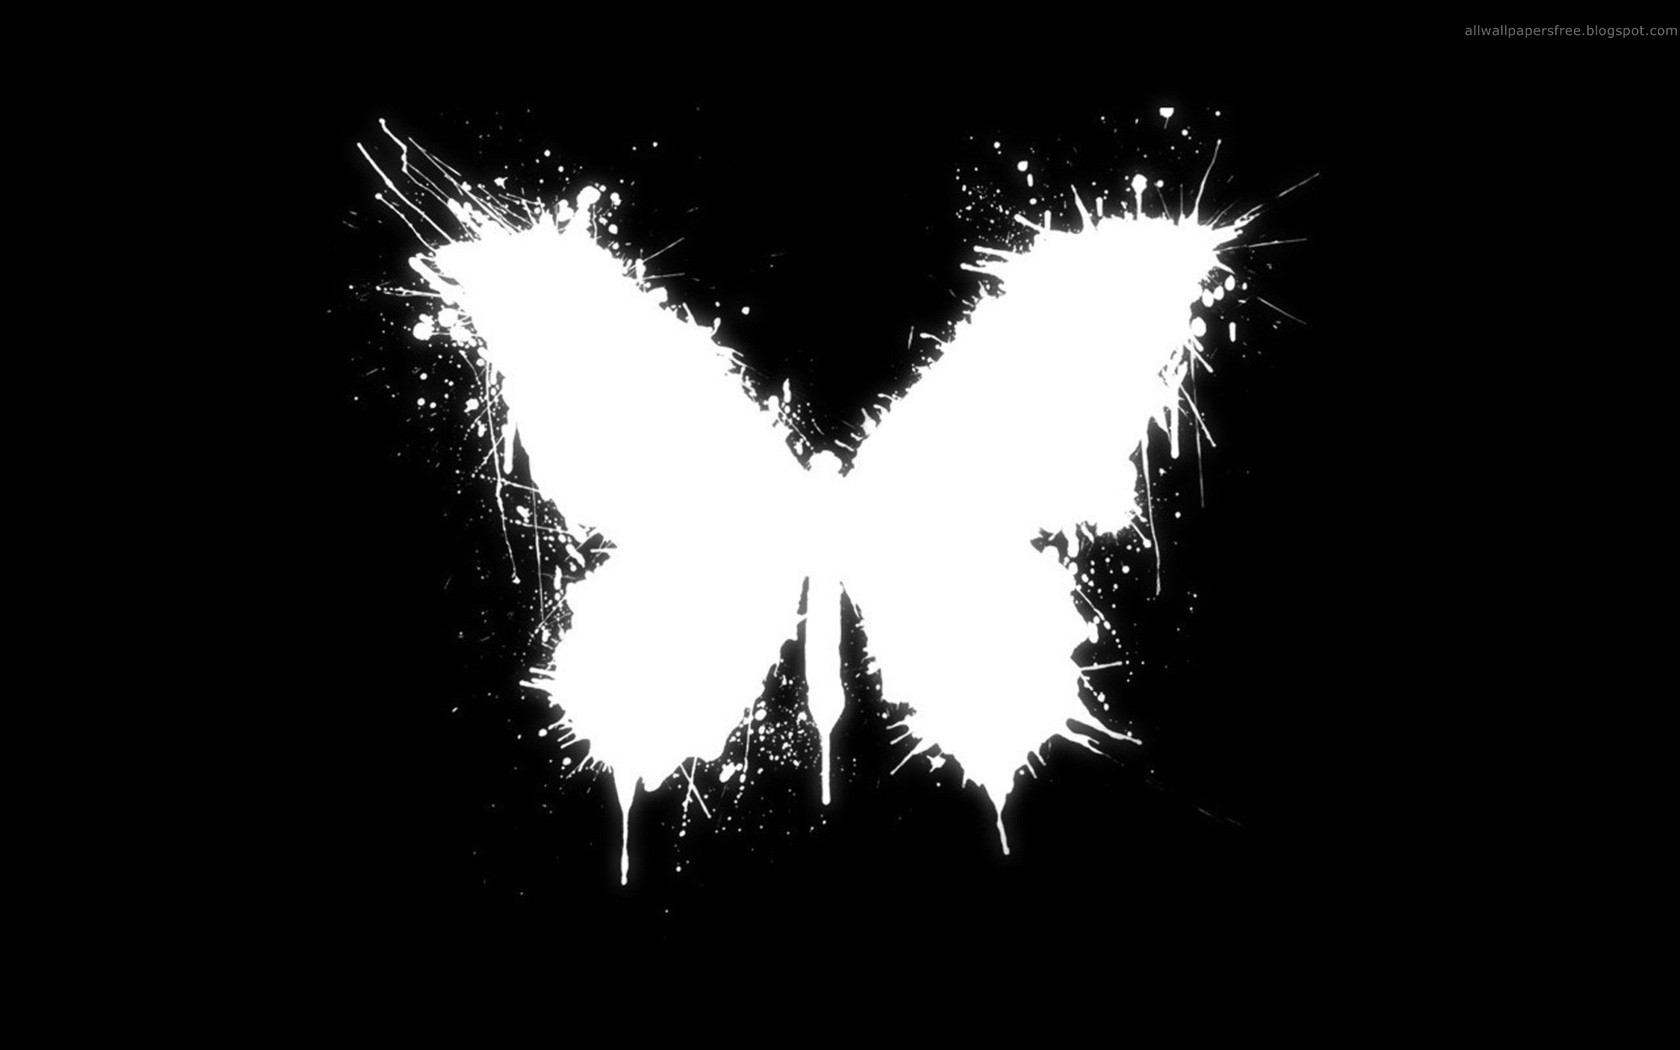 Butterfly Phone Wallpaper Images  Free Photos PNG Stickers Wallpapers   Backgrounds  rawpixel